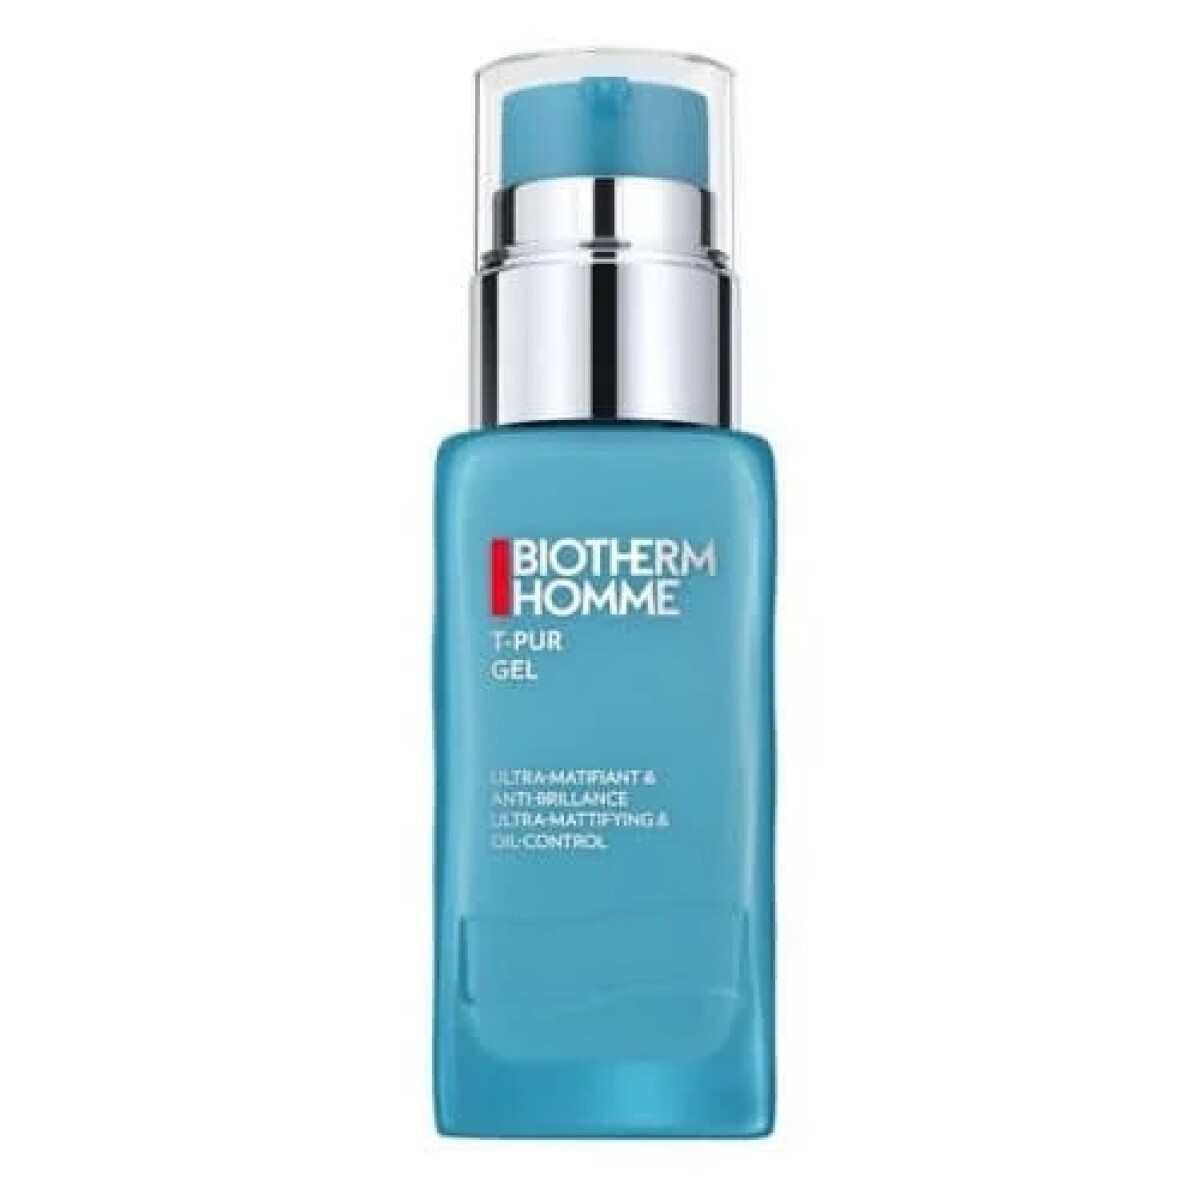 Biotherm Homme T-pur Gel 50 Ml. 